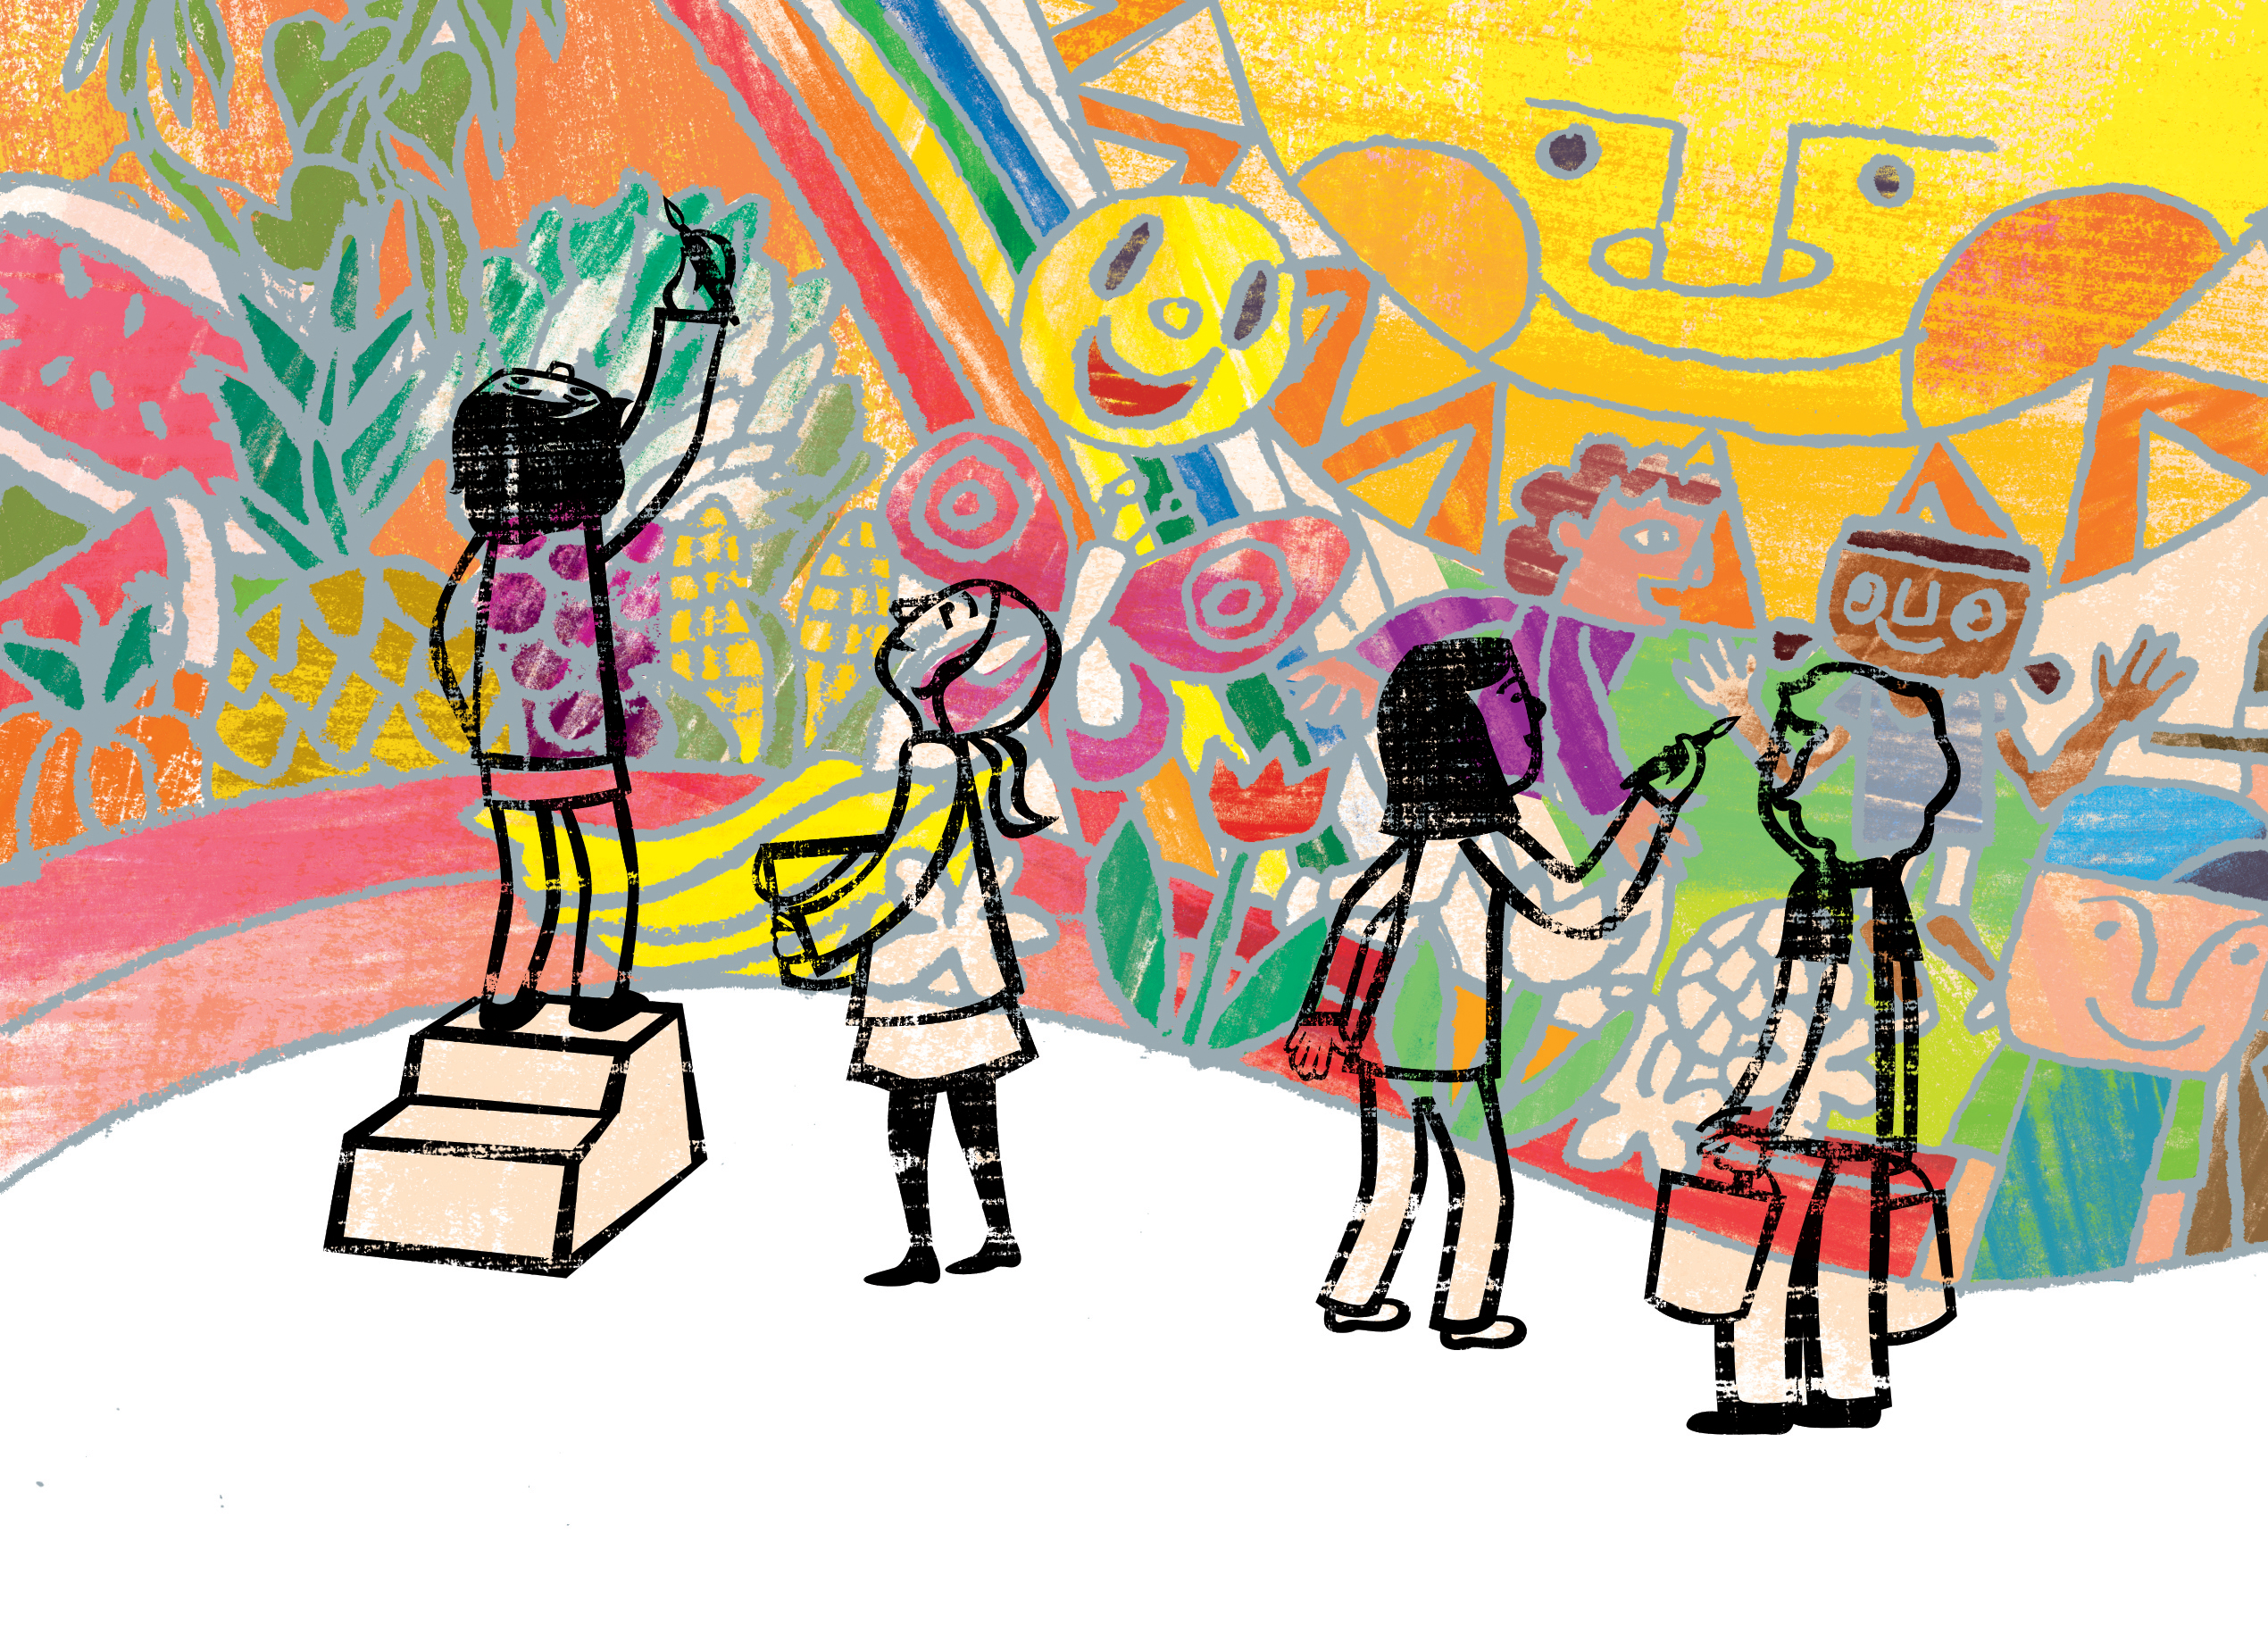 AGES 6-8: AFTER SCHOOL ONLINE WEEKLY ART CLASS: CREATIVE PAINTING, DRAWING,  & SELF-EXPRESSION - The Art Studio NY